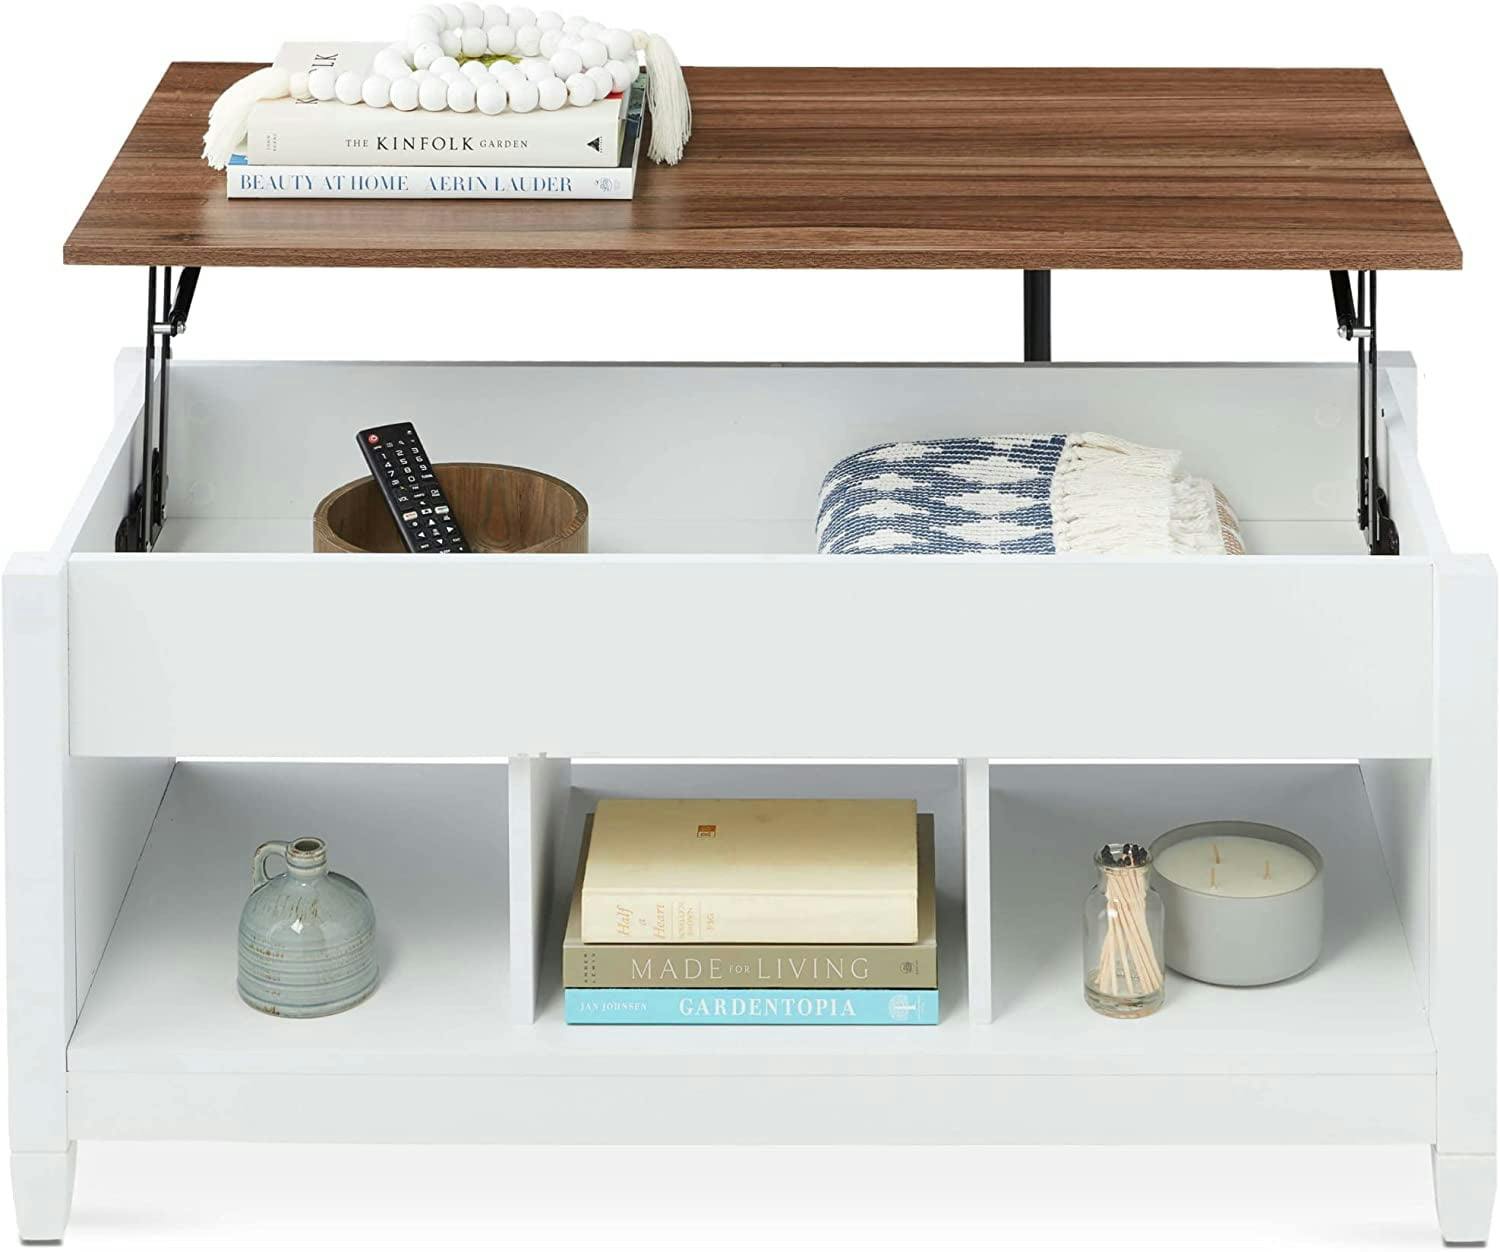 Modern Lift-Top Coffee Table with Hidden Storage in White and Brown